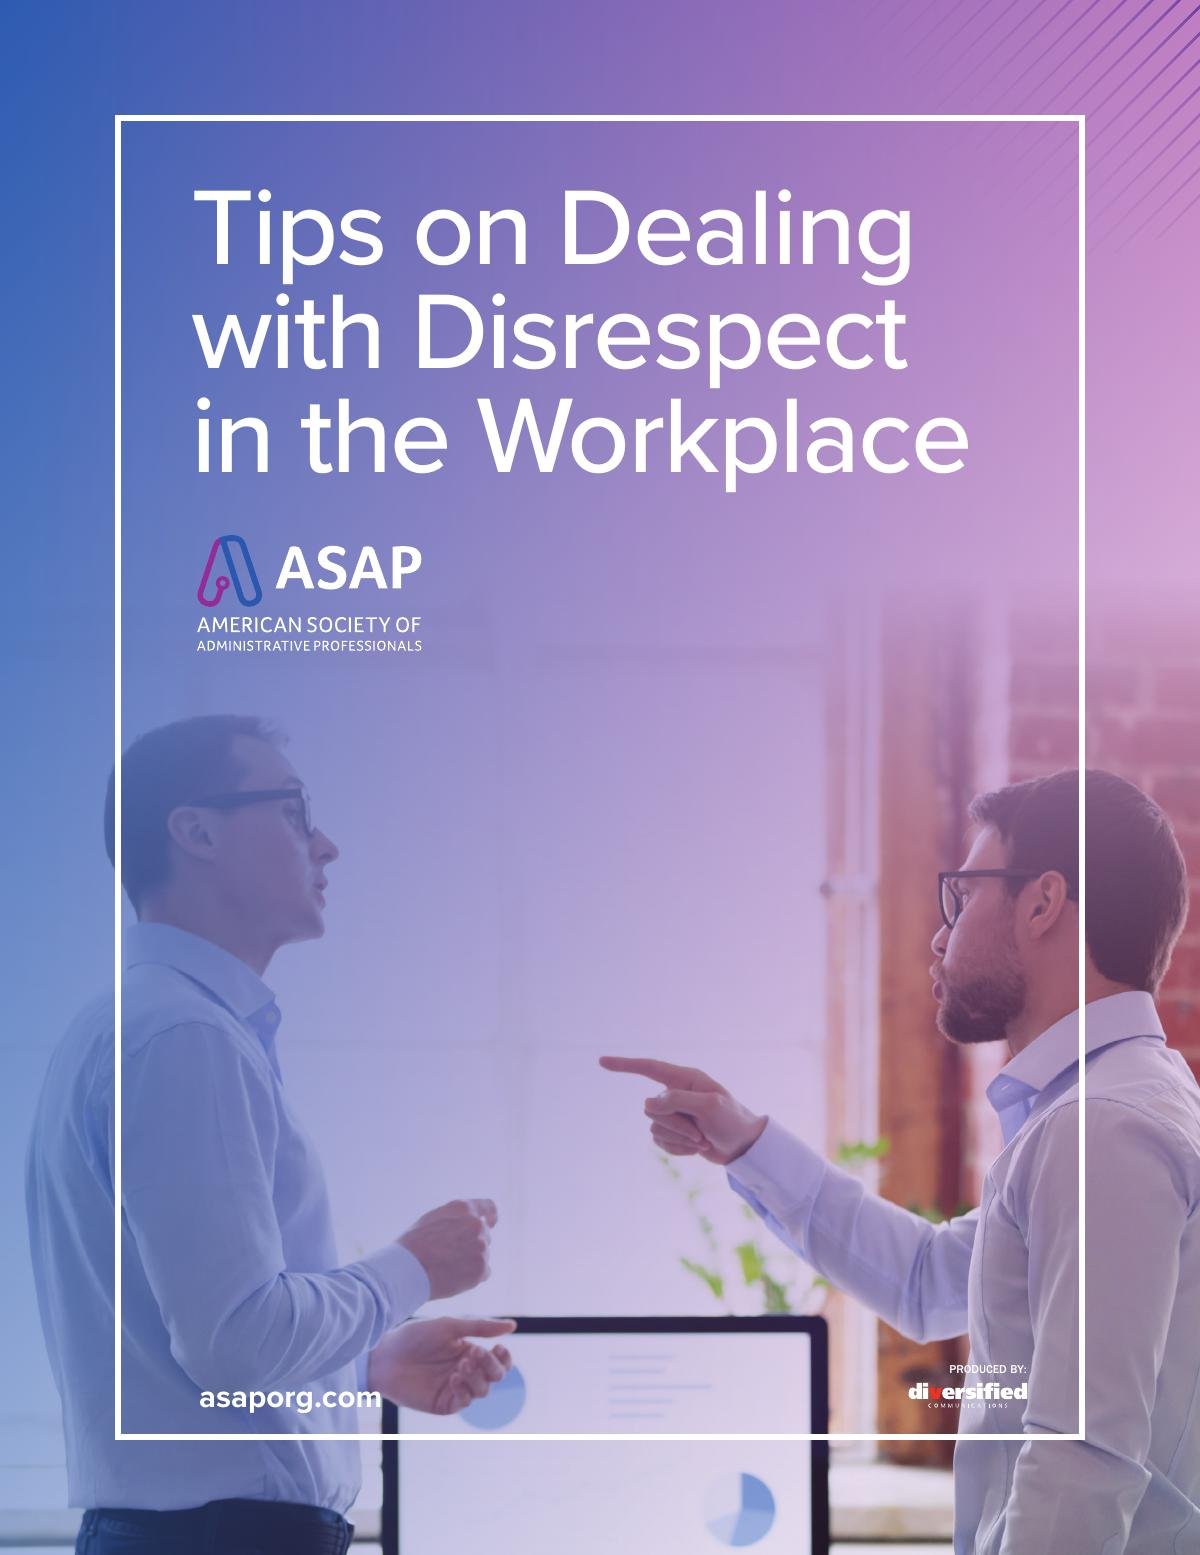 Tips on Dealing with Disrespect in the Workplace